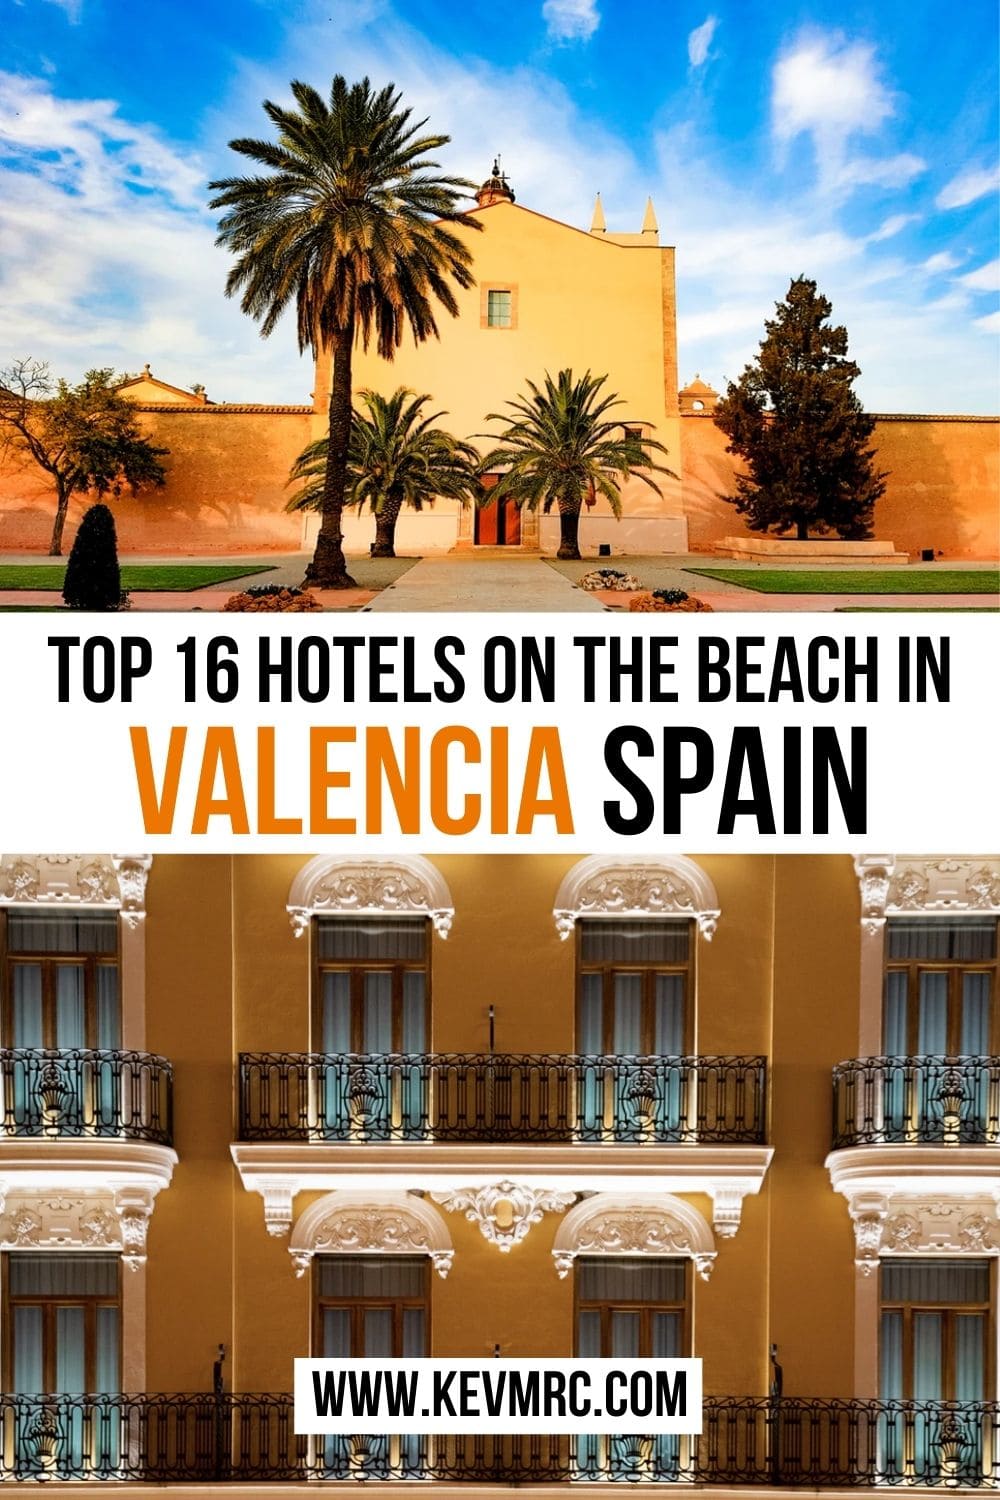 The Best Hotels on the Beach in Valencia Spain. Valencia is a popular destination among those who want to enjoy the mild and sunny Mediterranean climate on the beach. Here is a selection of the 16 best beach hotels in Valencia Spain! valencia spain travel | valencia spain beach hotels | valencia spain beach summer | valencia beach